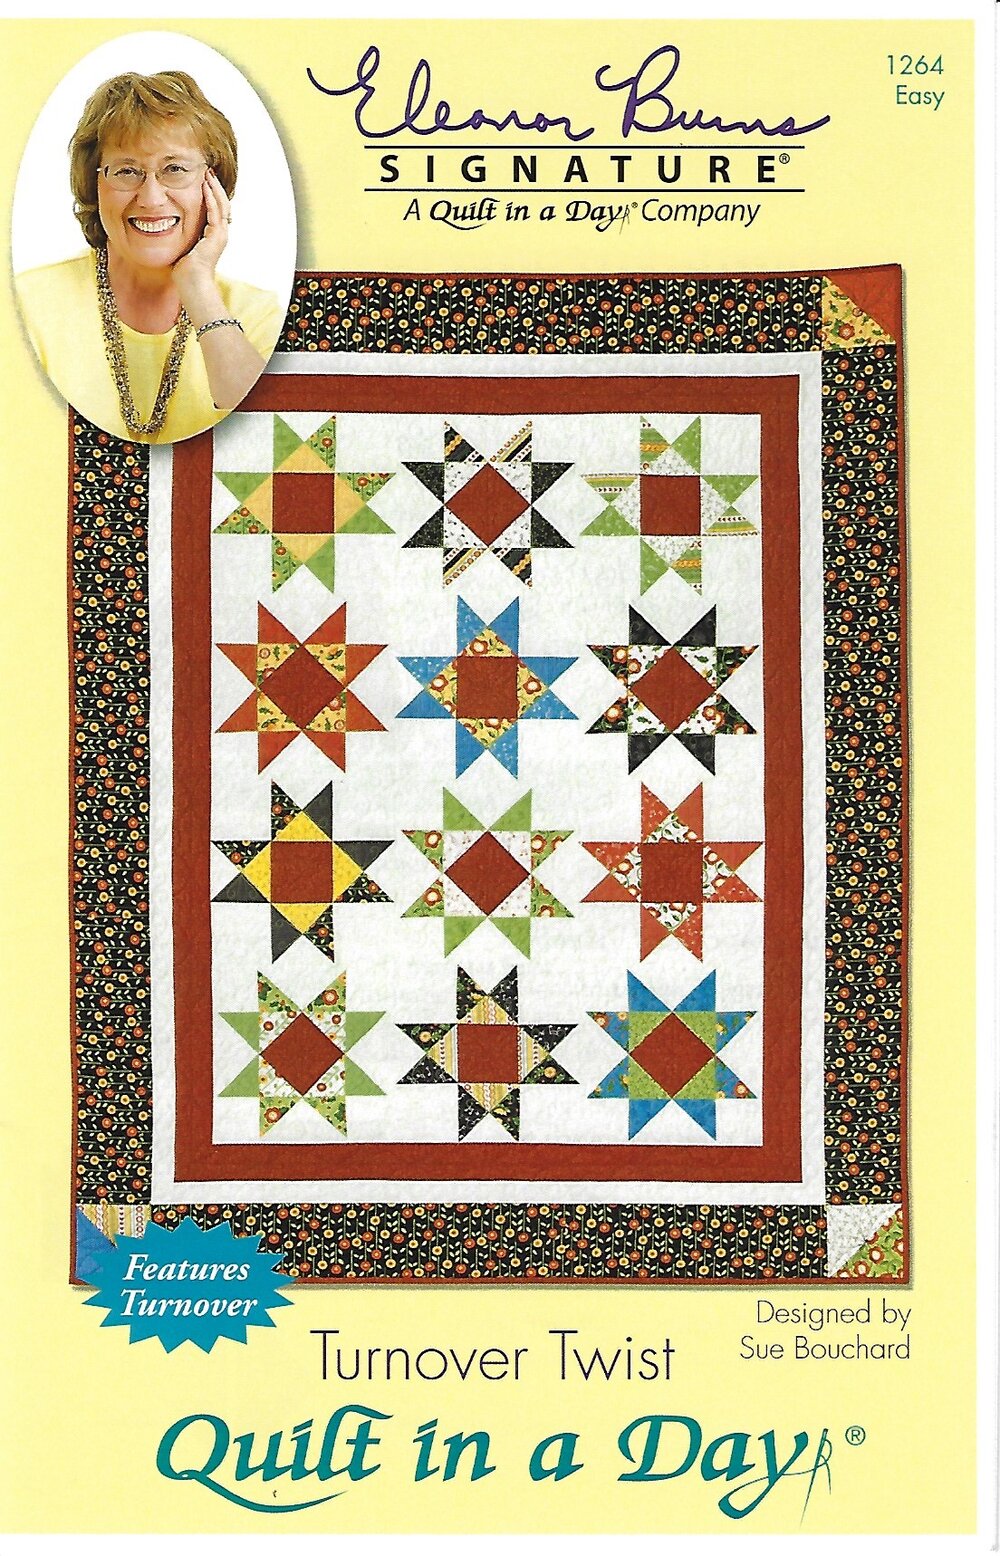  Twisted Star: Eleanor Burns Signature Quilt Pattern by